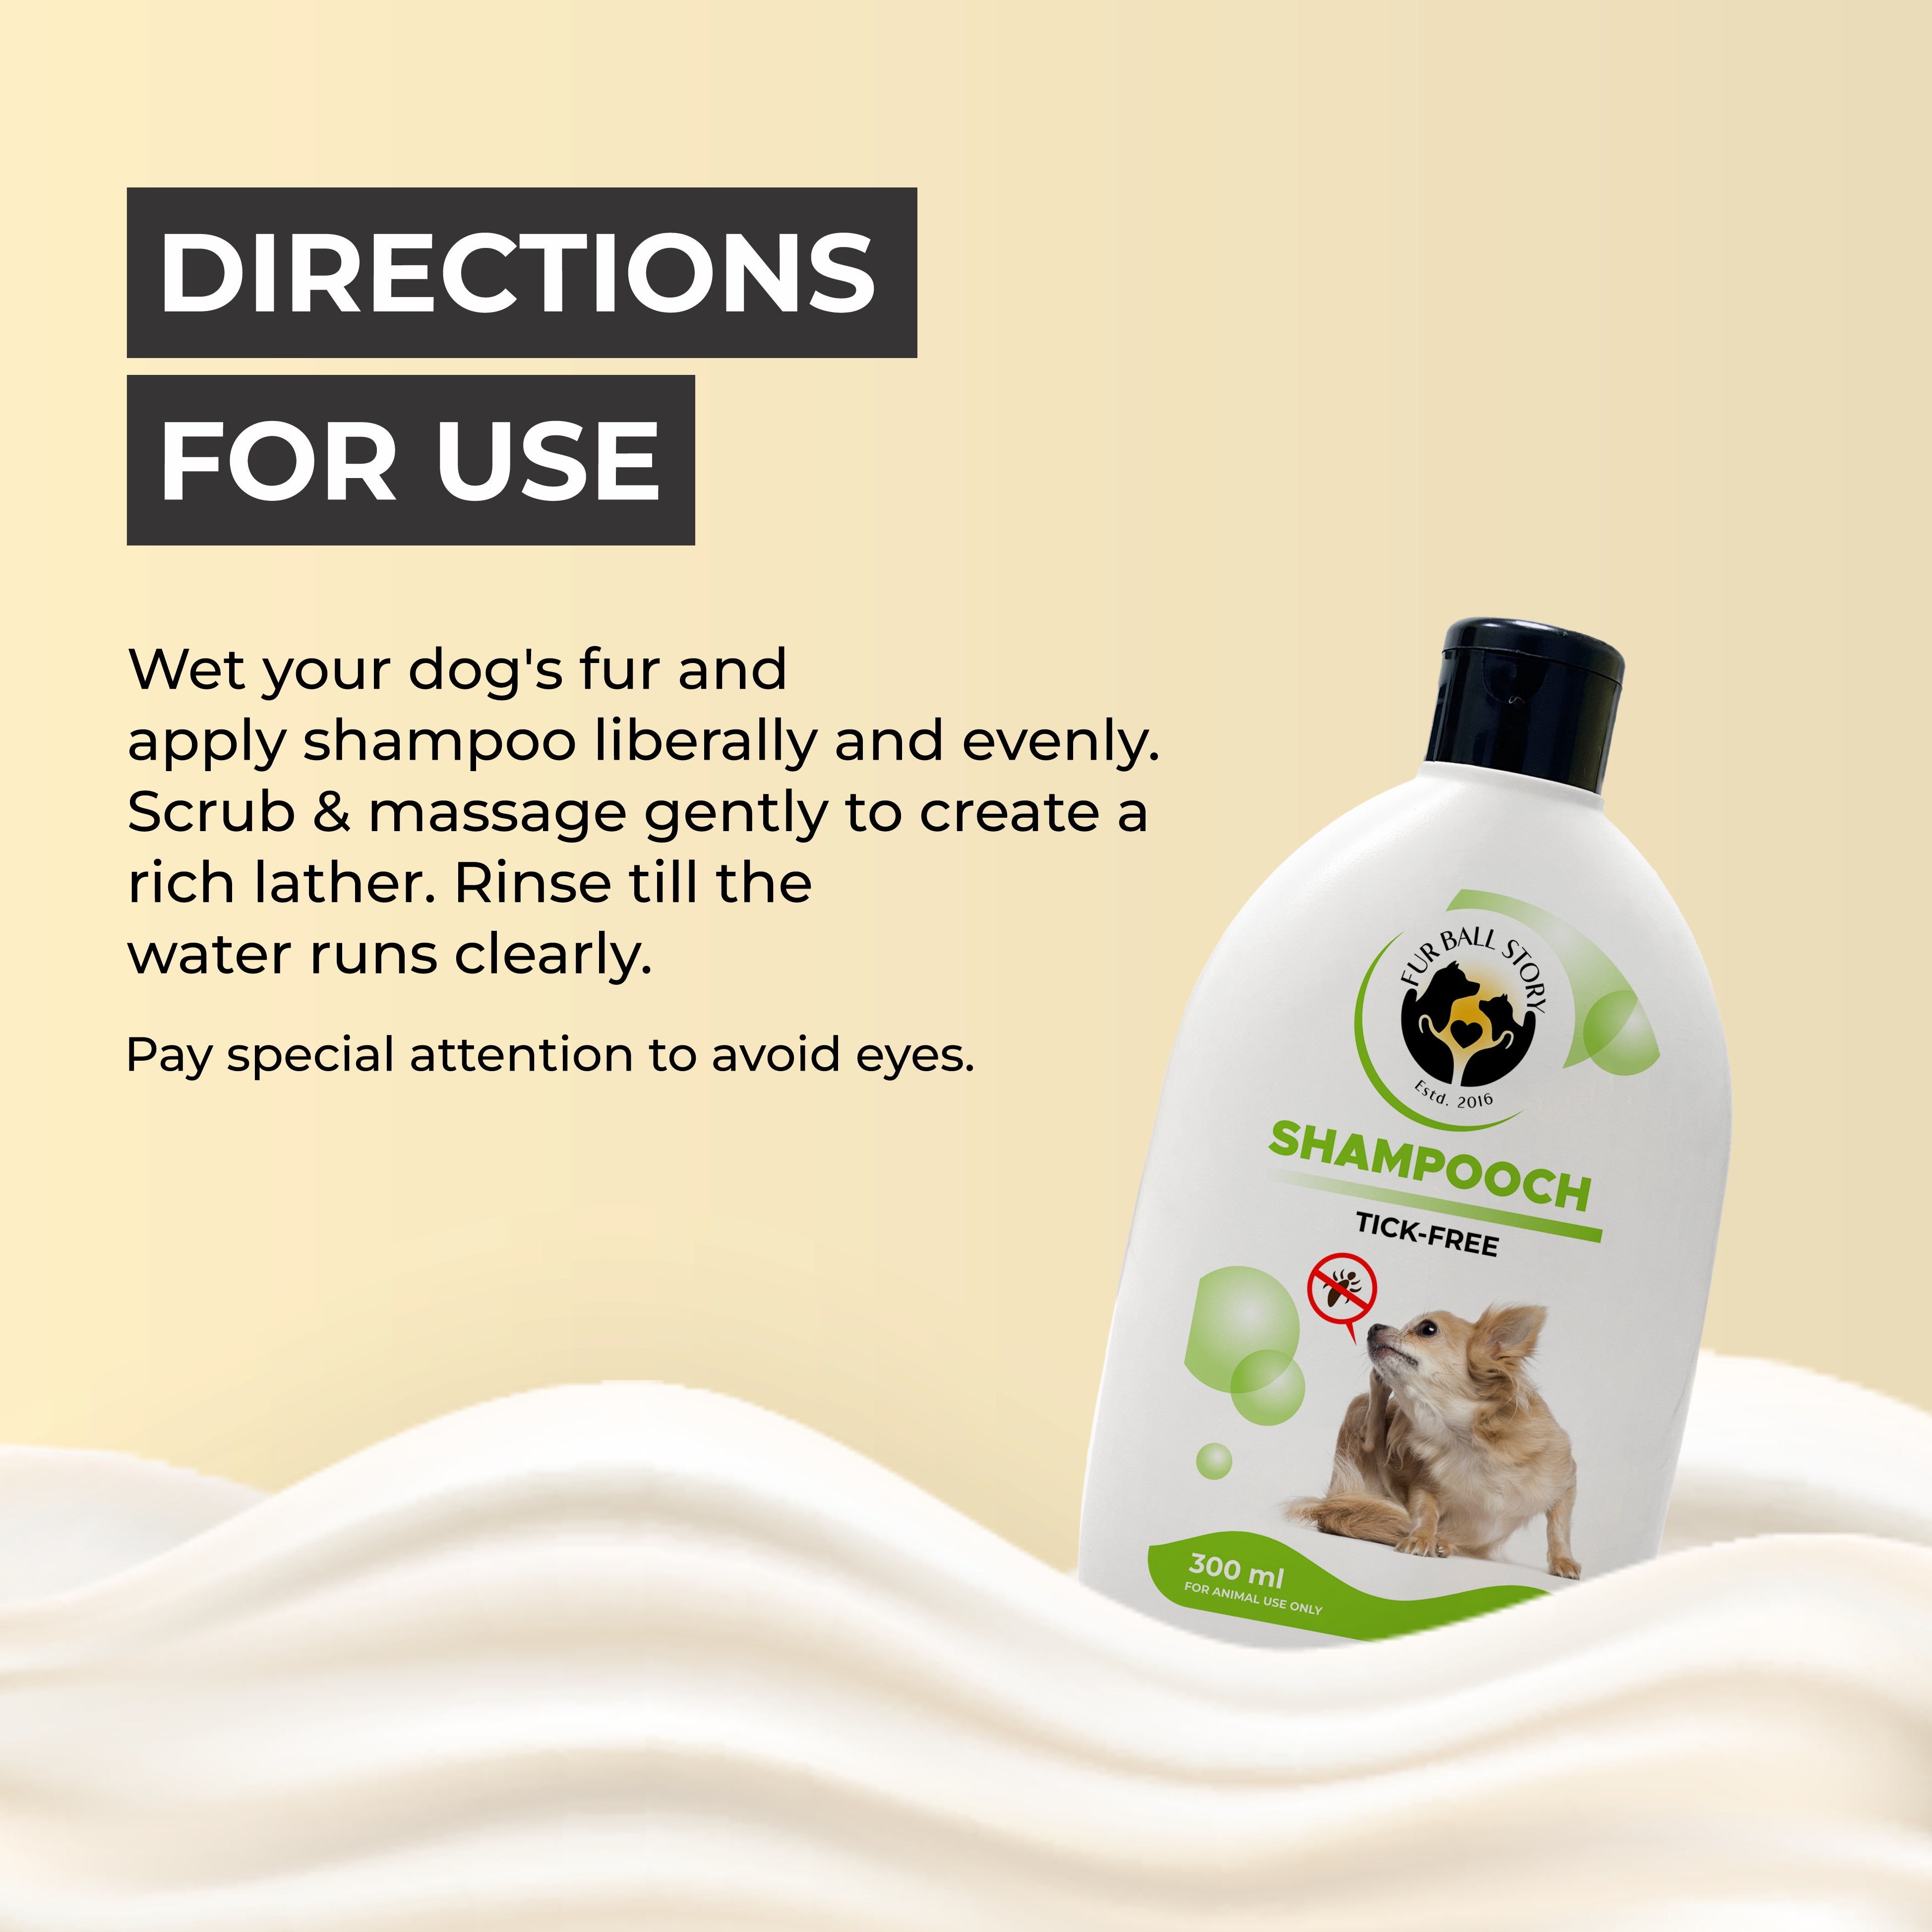 Shampooch Tick Free: directions for use